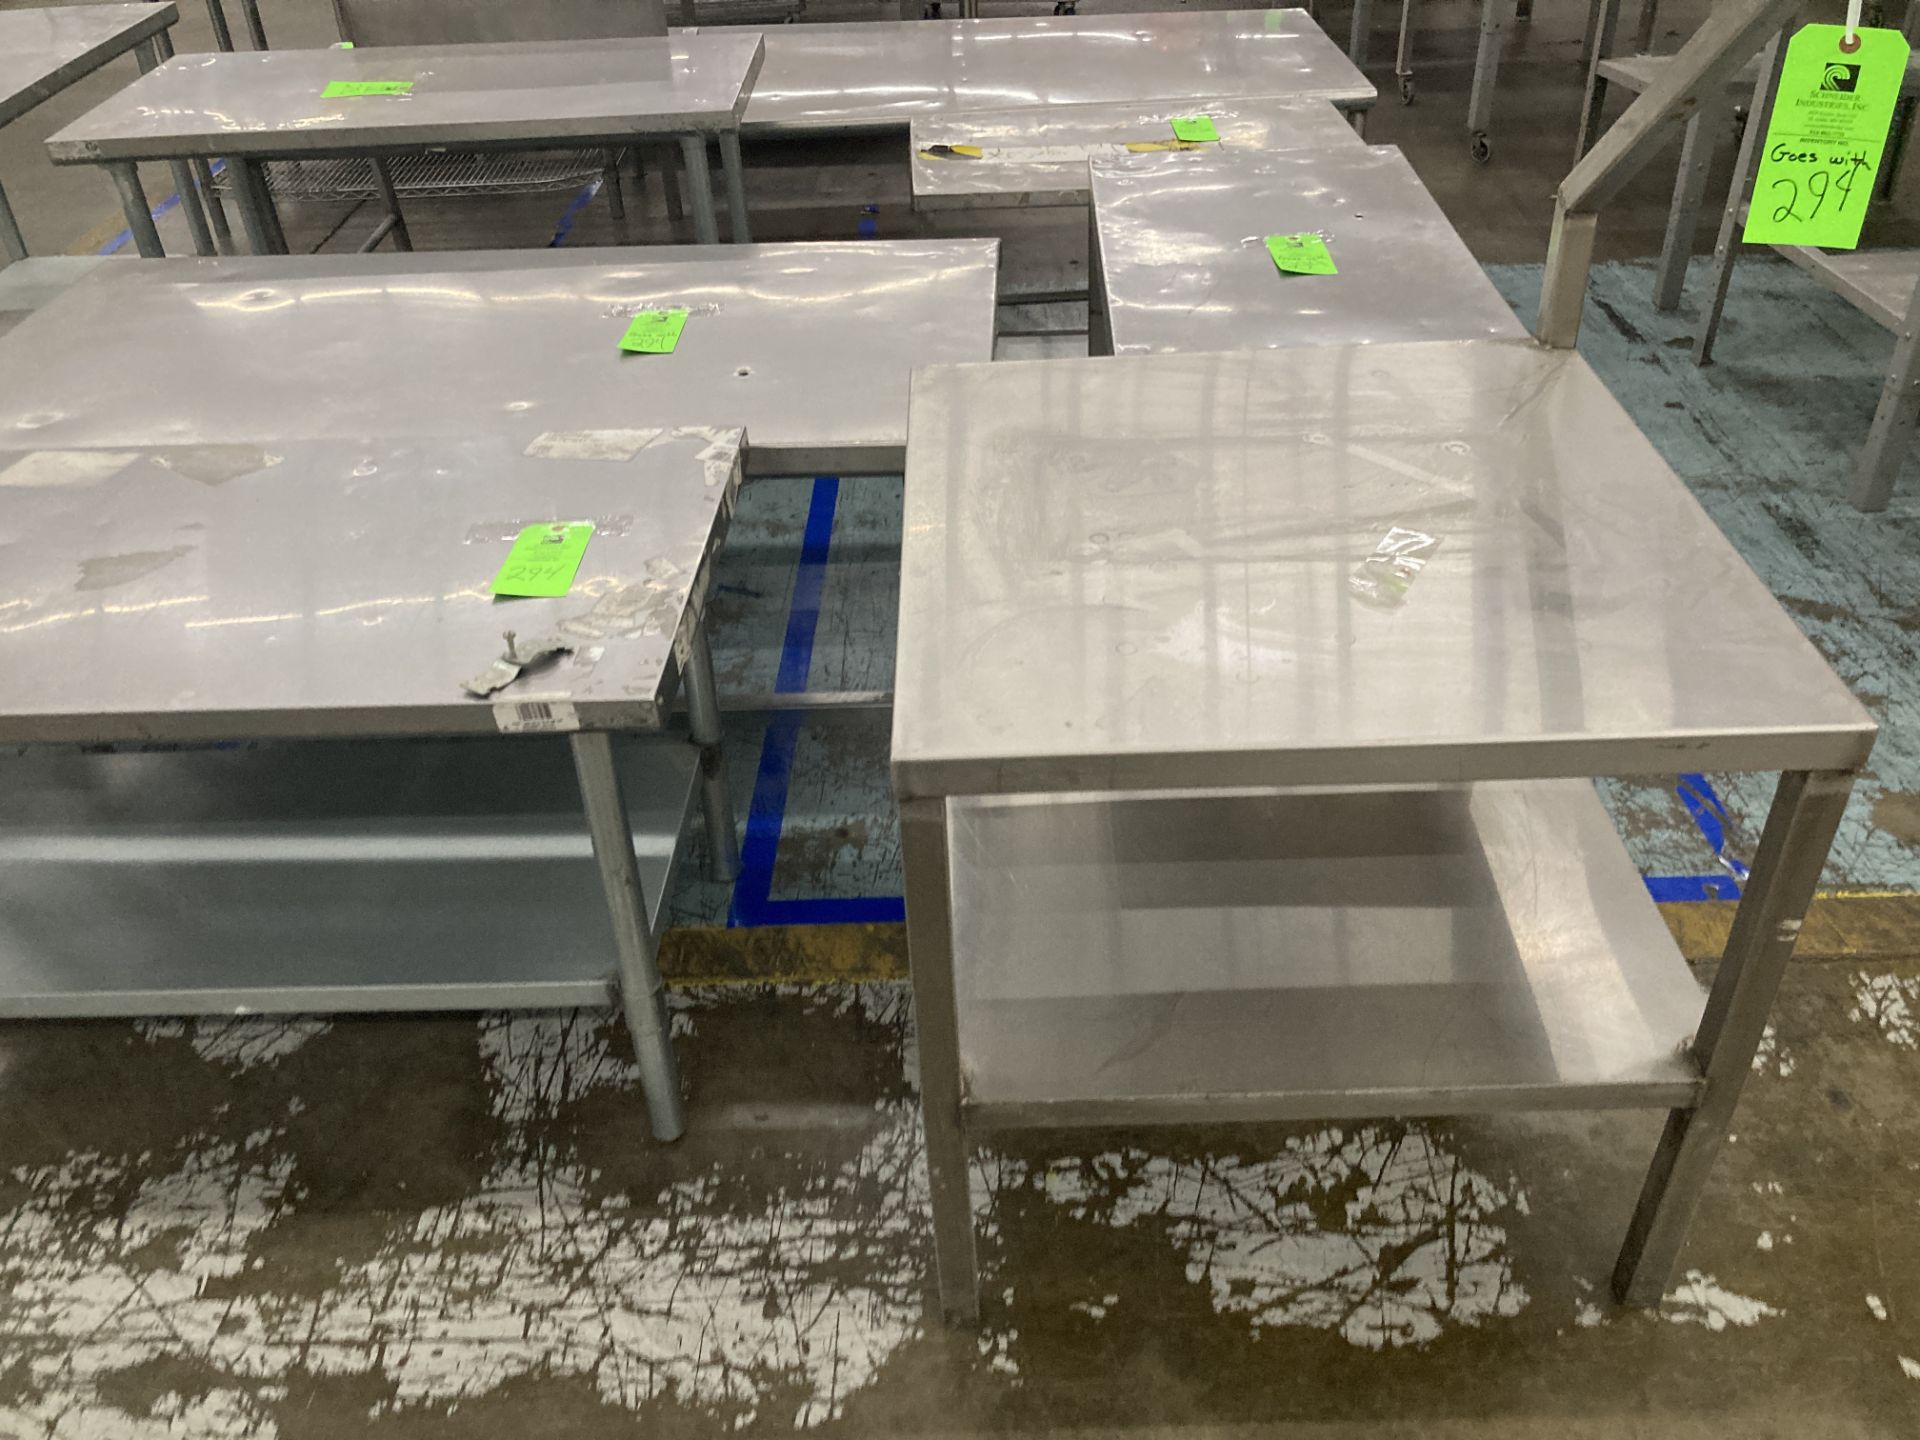 LOT OF 5 stainless steel table, 30 in X 36 X 21 in H, 30 in X 60 in x 24 in h, 30 in x 30 in x 30 - Image 2 of 3